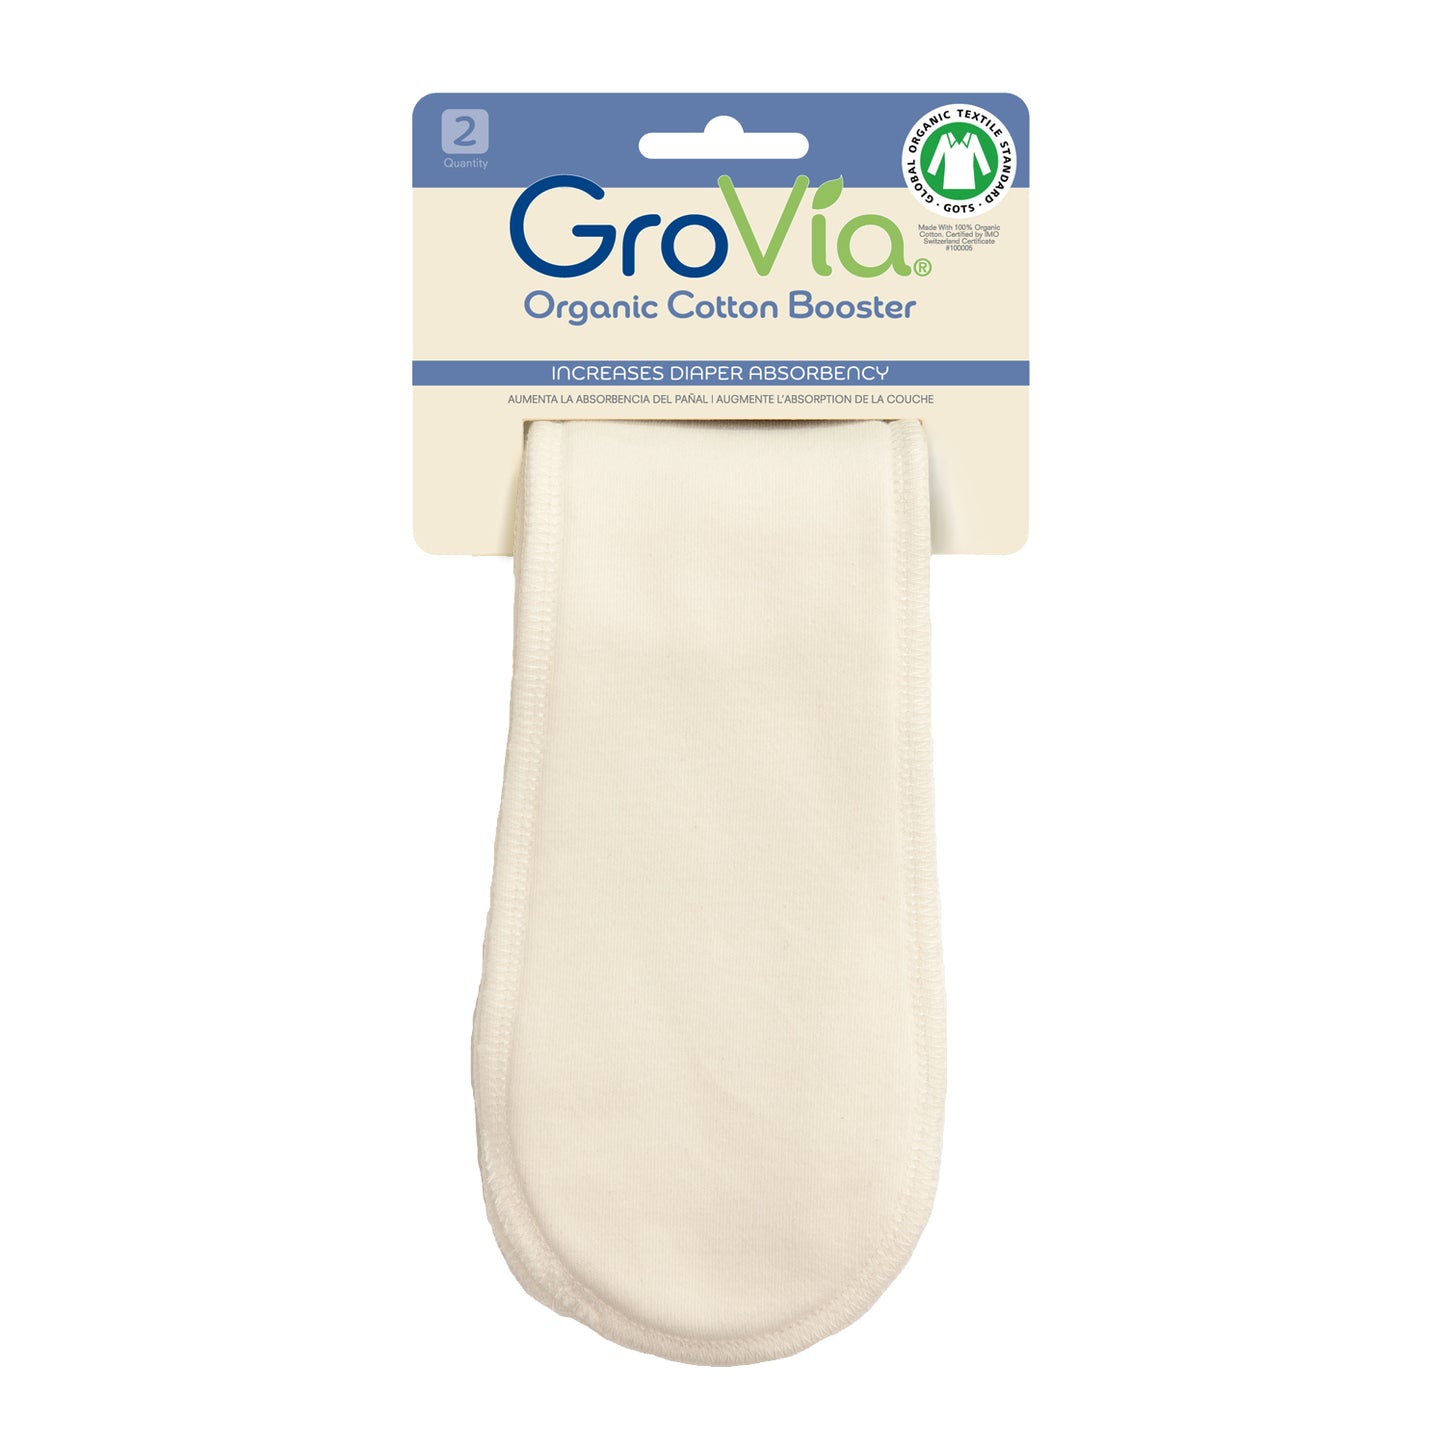 Organic Cotton Booster (2-pack)